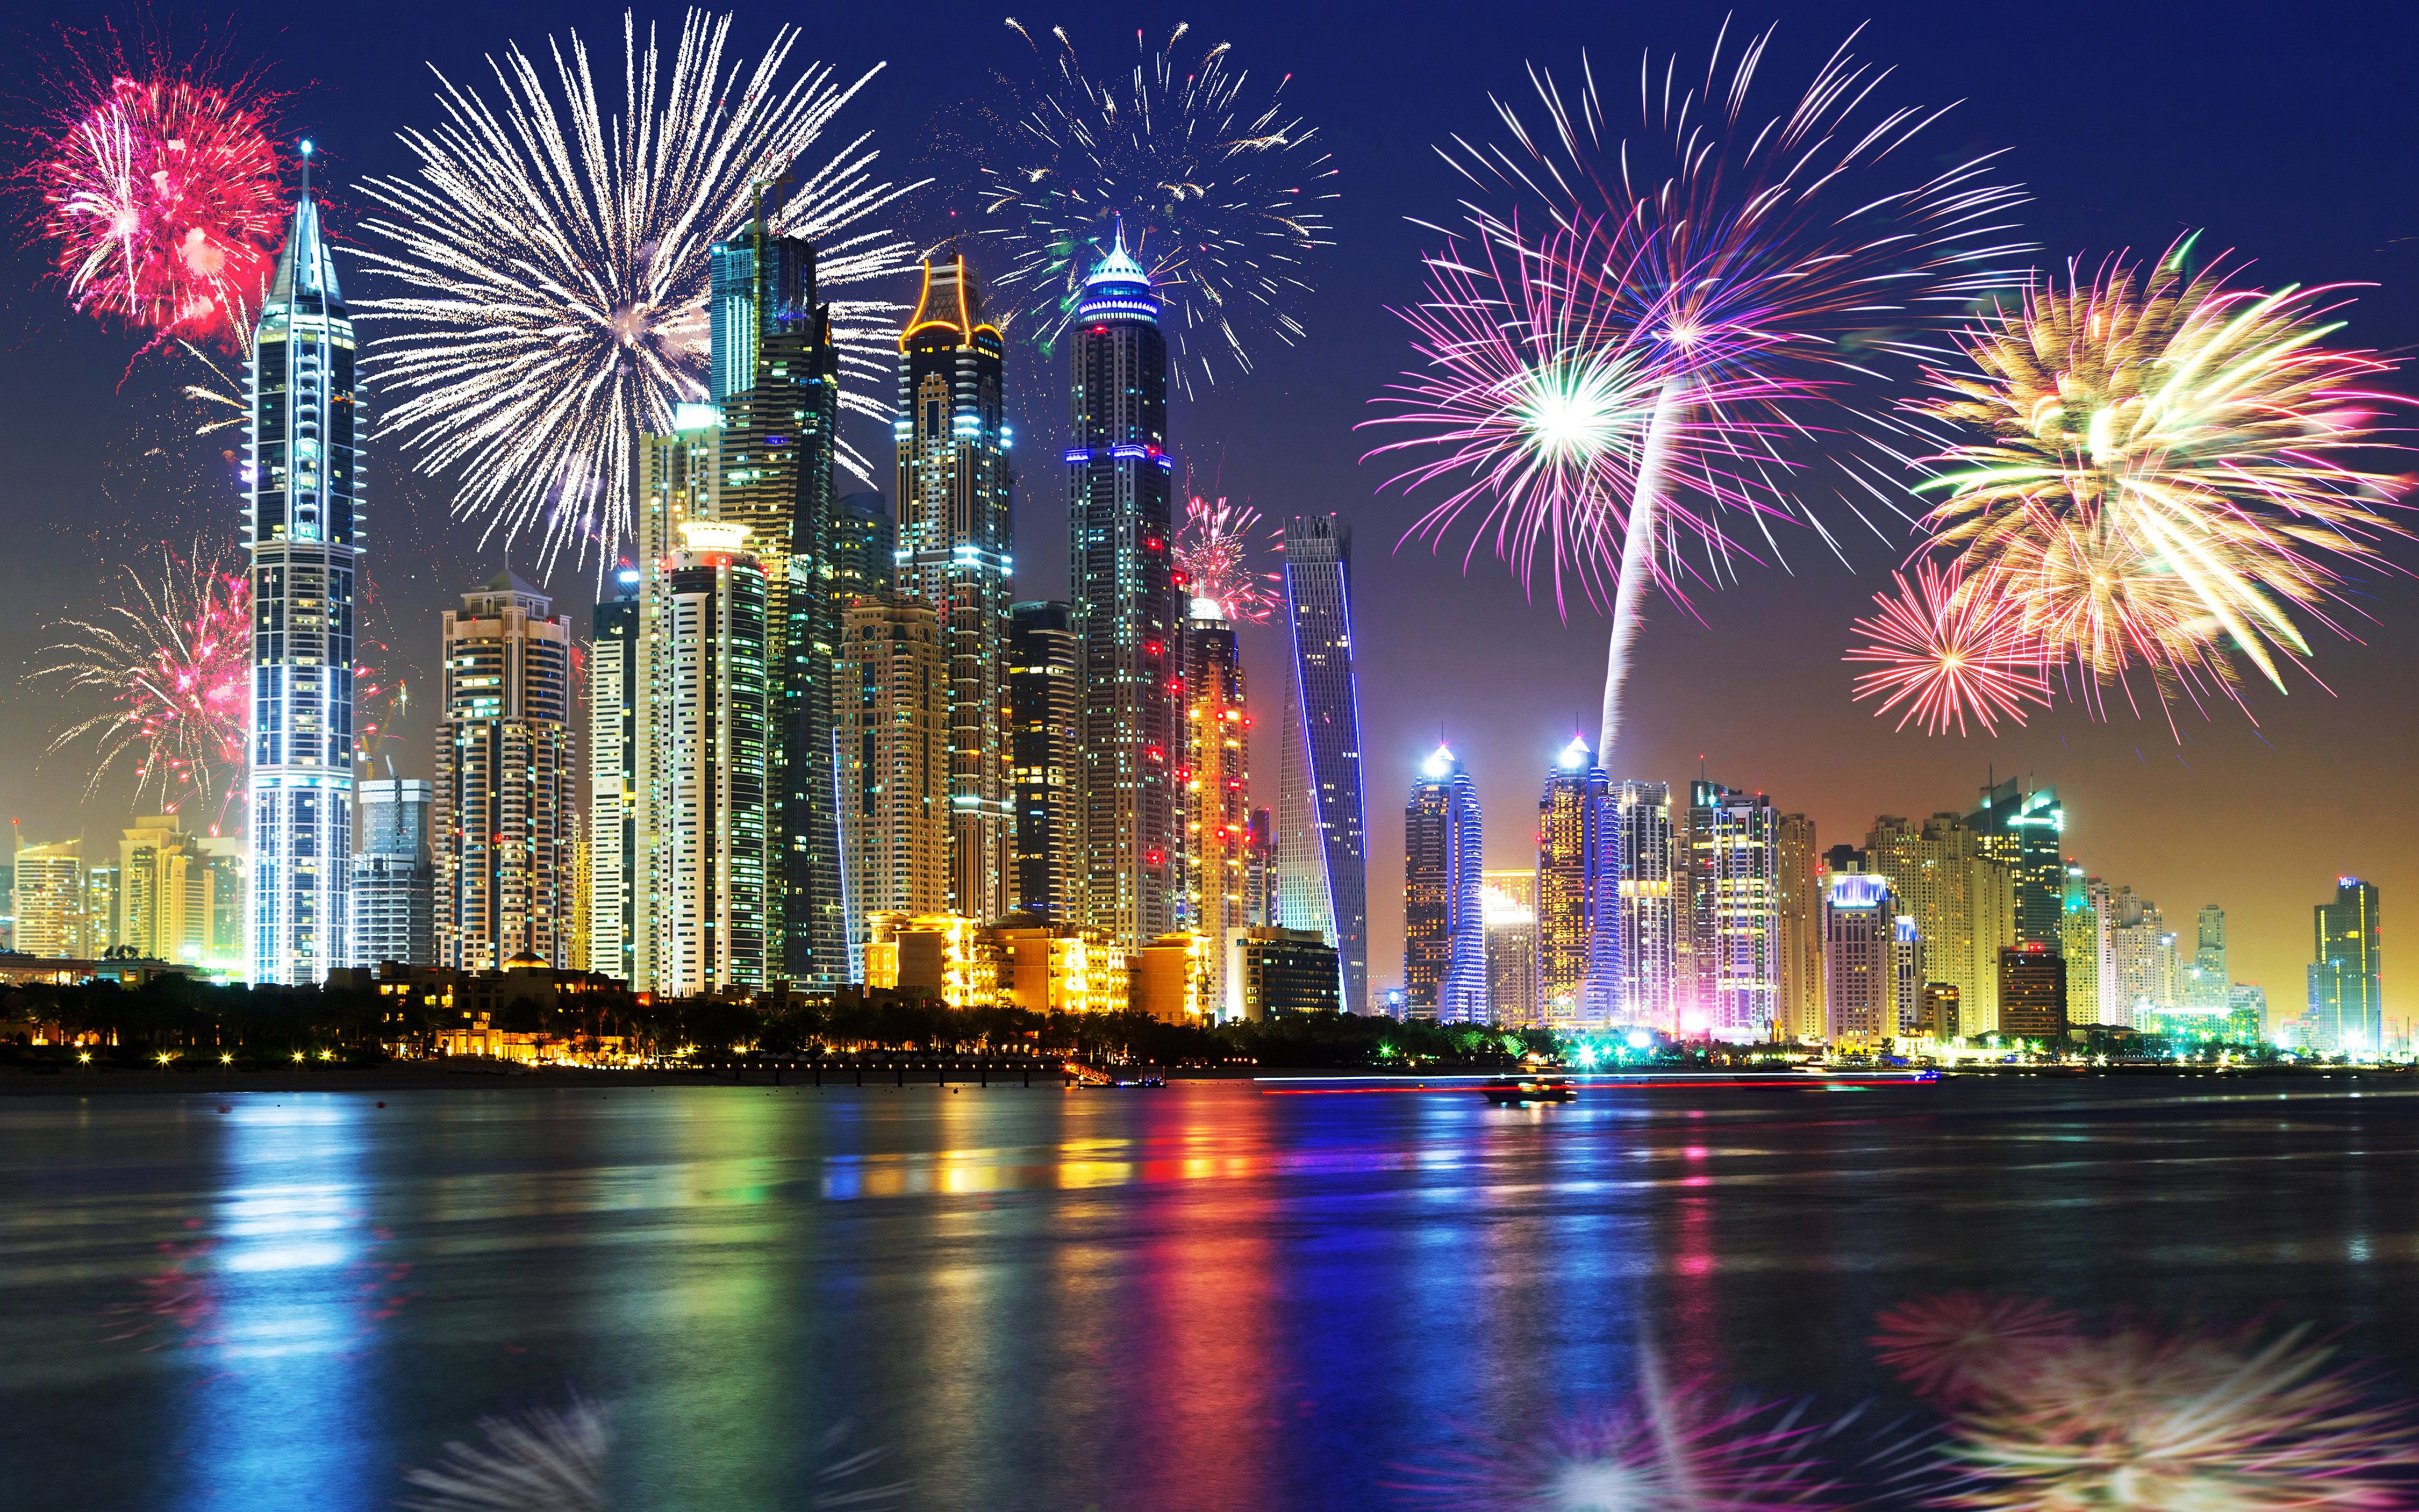 Dubai City At Night Christmas Holidays Fireworks In The Sky Skyscrapers United Arab Emirates Desktop Wallpaper HD For Your Computer 4500x2813, Wallpaper13.com